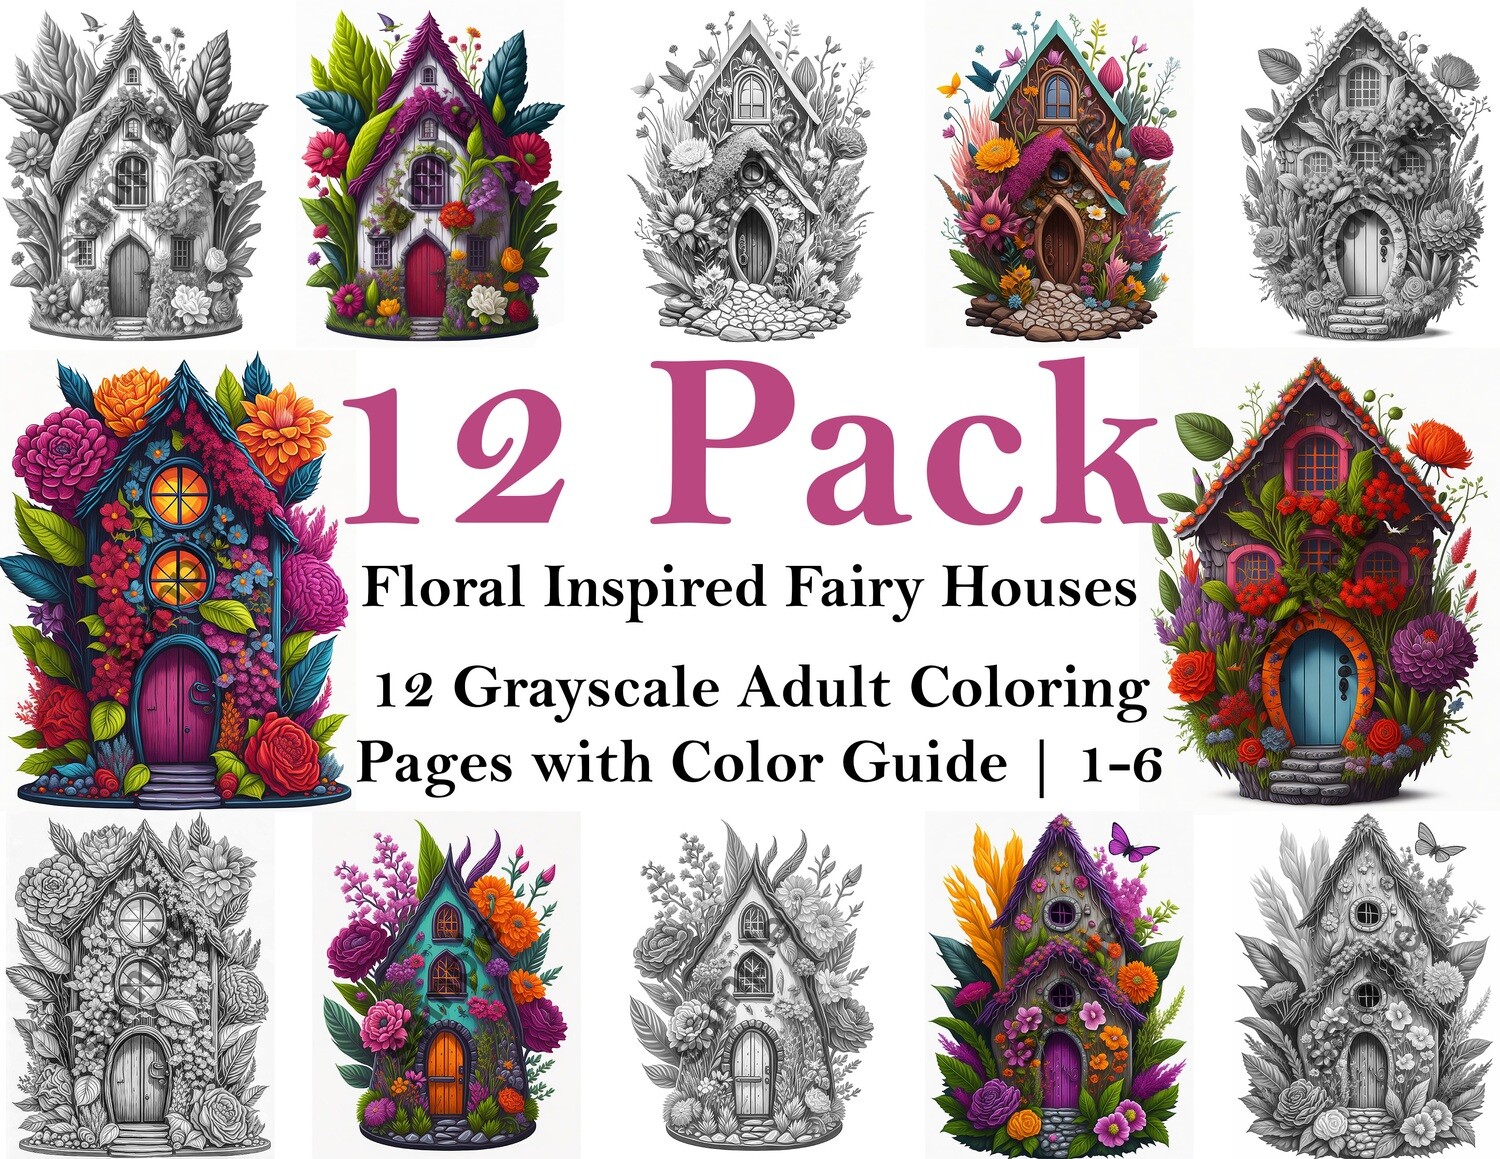 Floral Inspired Fairy Houses Grayscale Adult Coloring Pages 12 Pack PDF